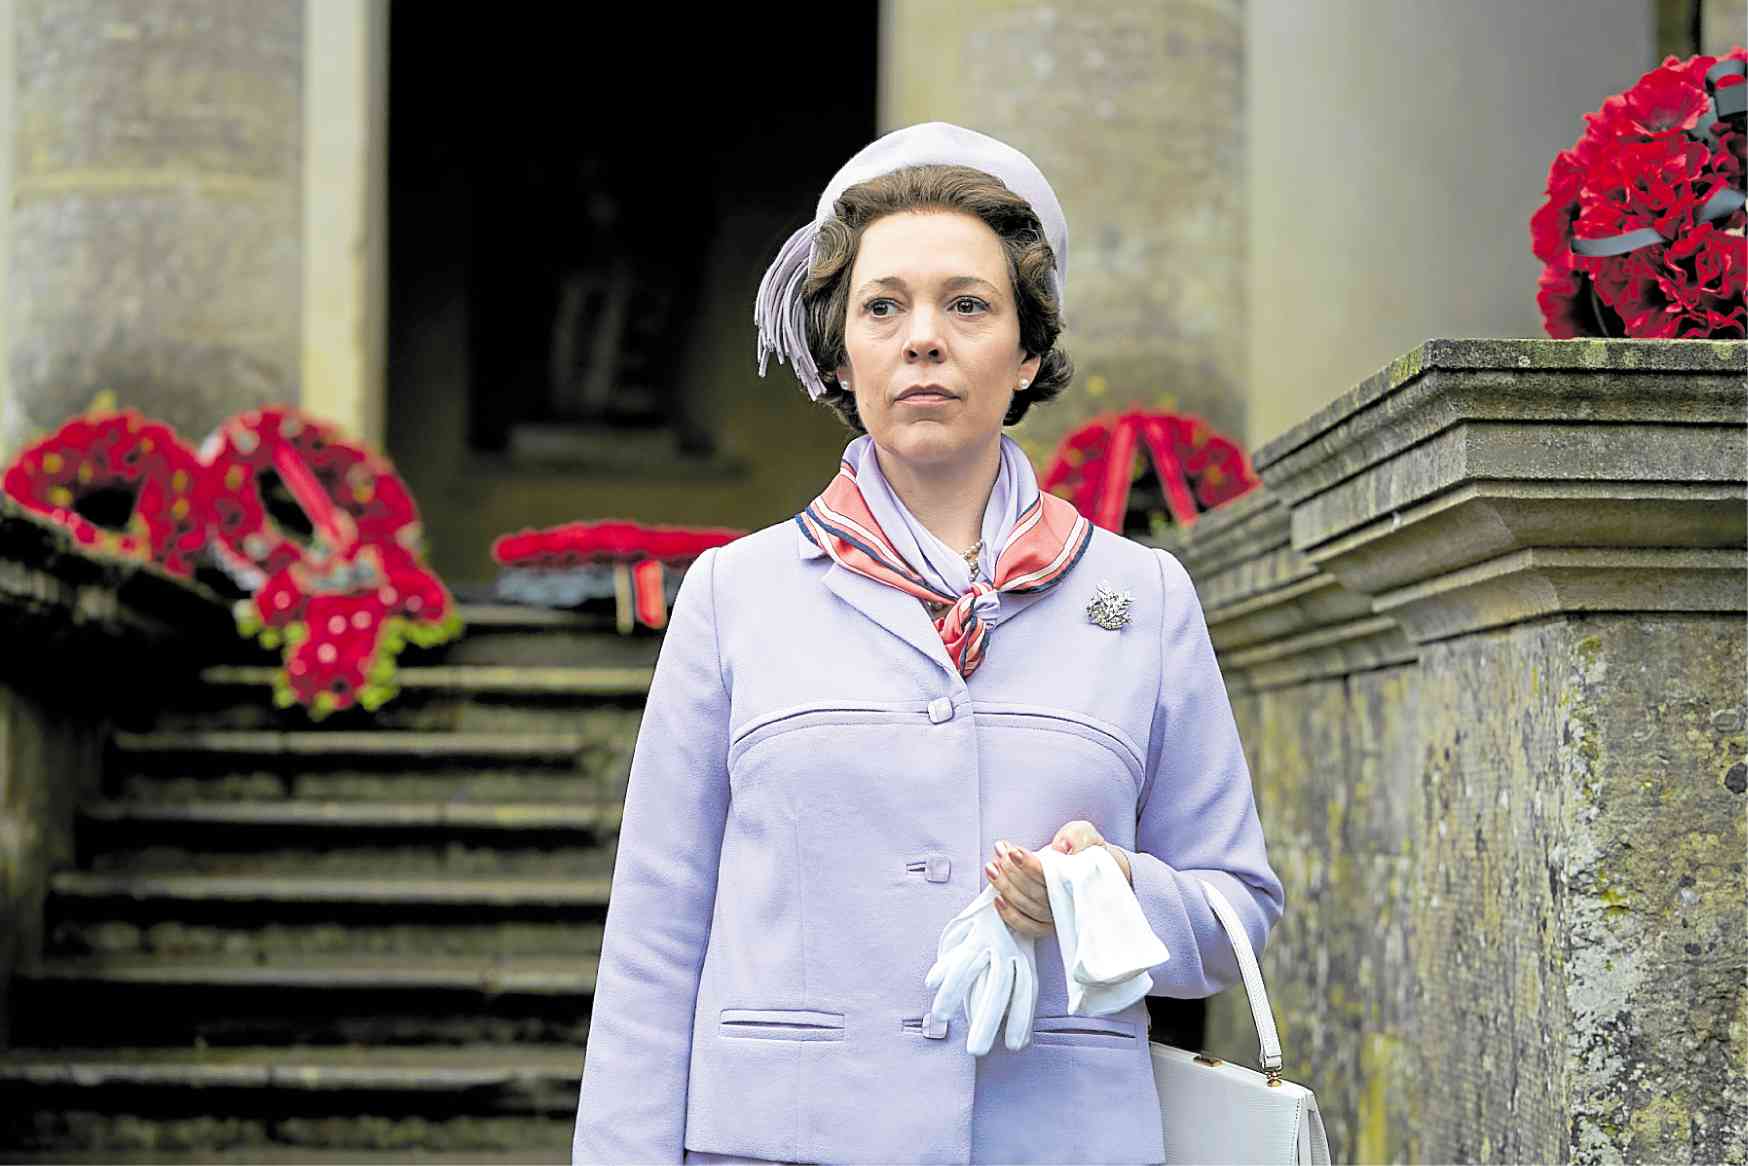 Astronauts and nail varnish: on the set of ‘The Crown’